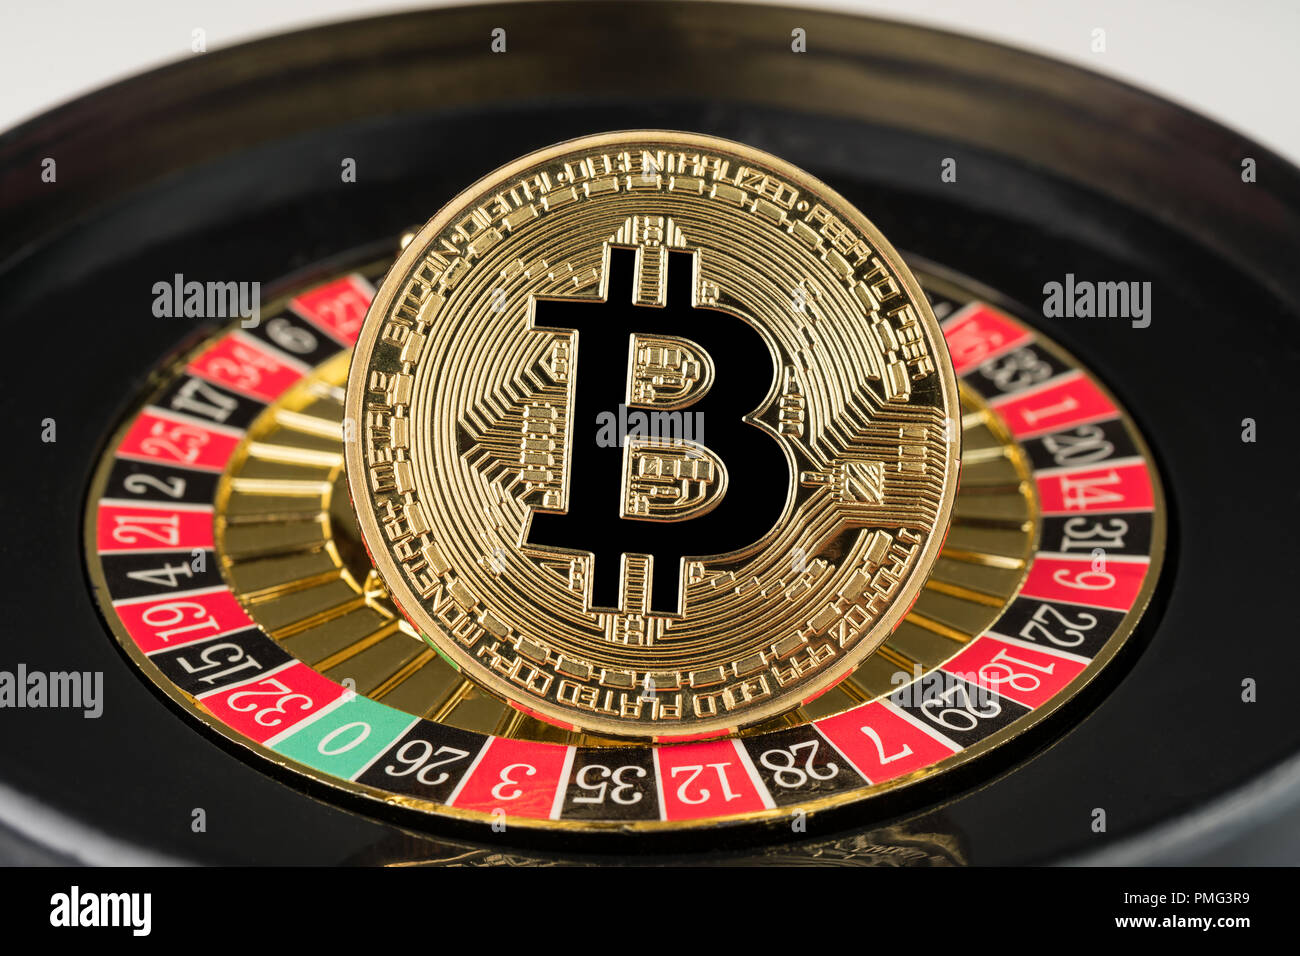 Is best bitcoin casinos Making Me Rich?